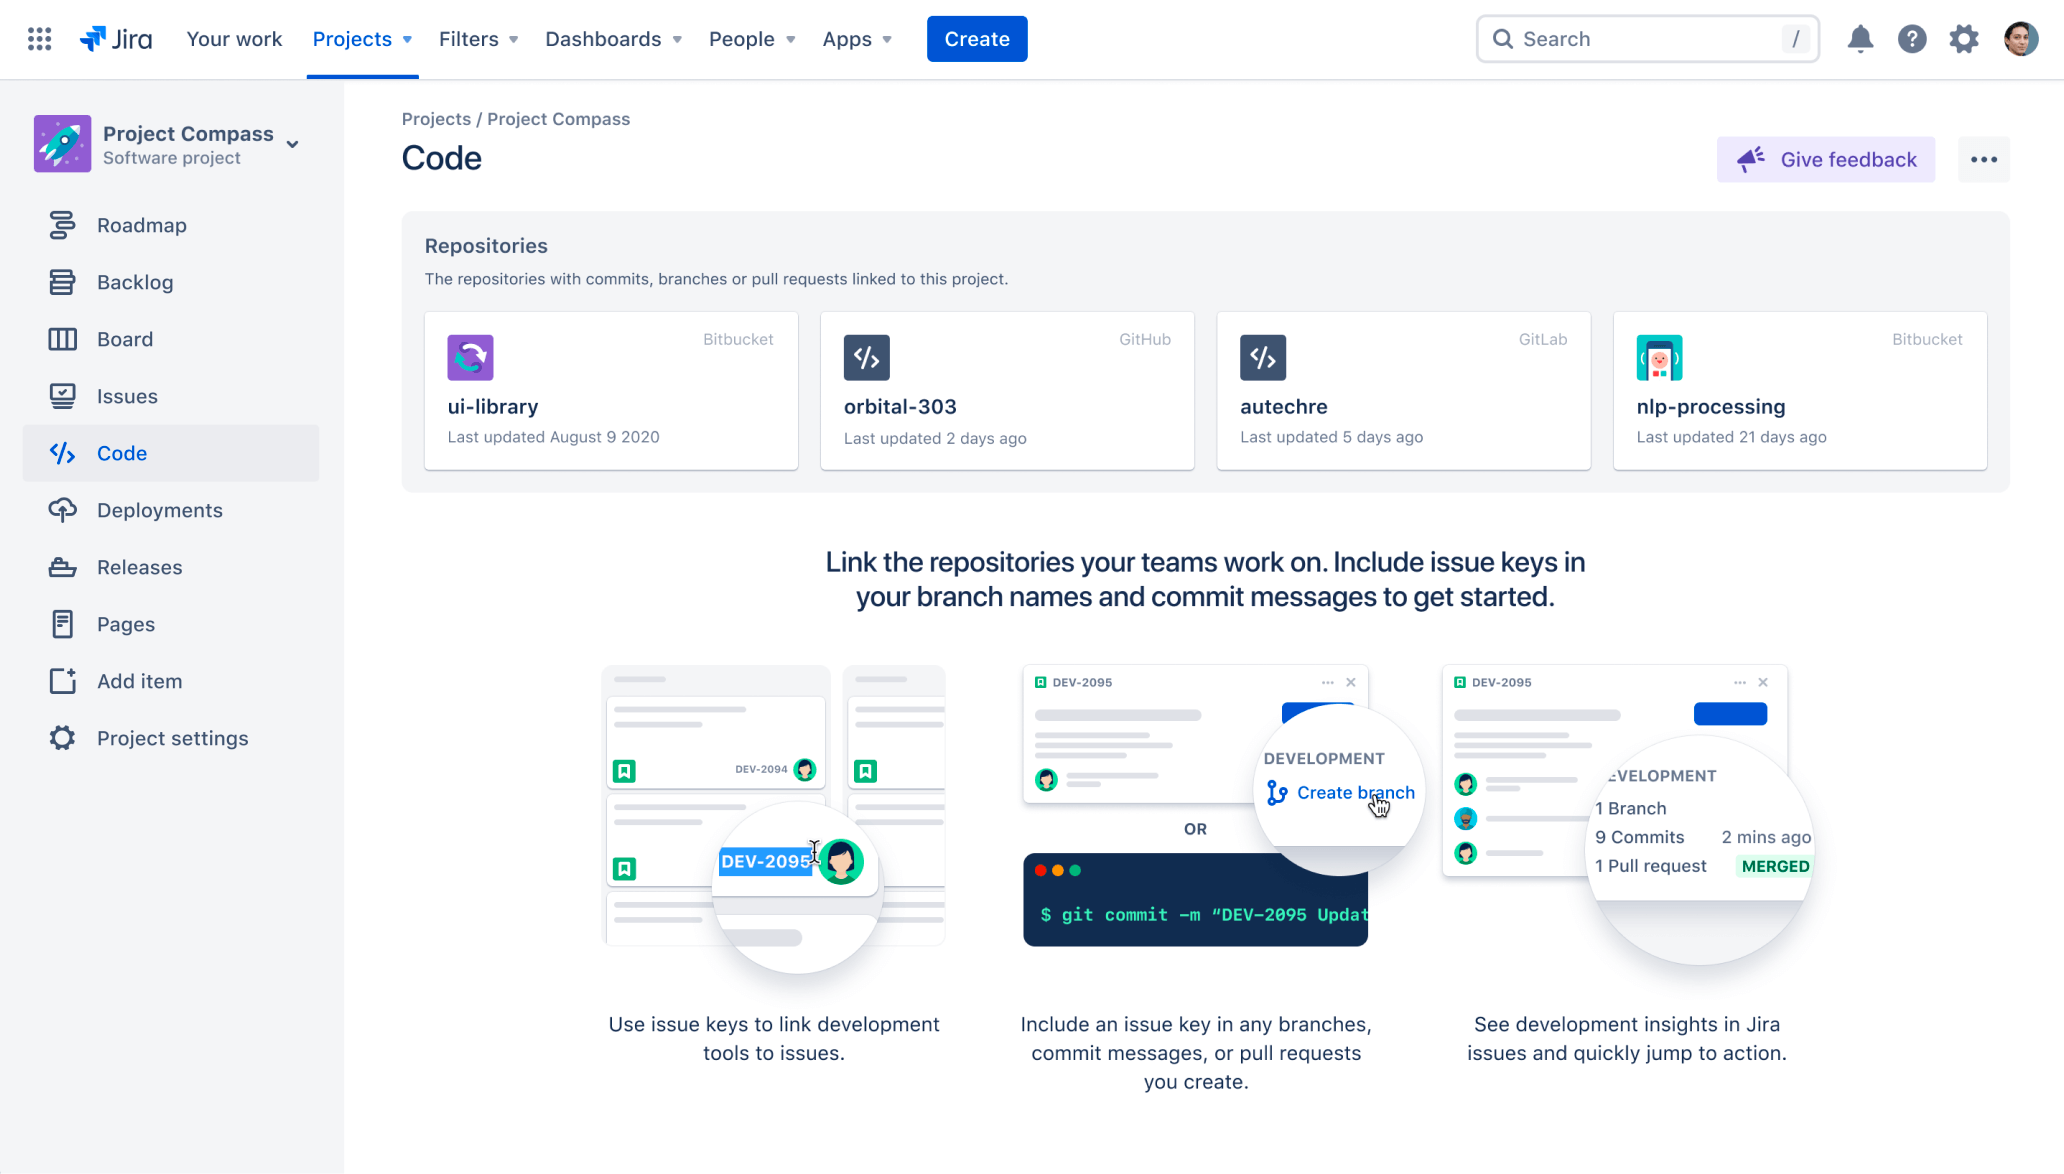 Tips for integrating TeamCity with Bitbucket and Jira